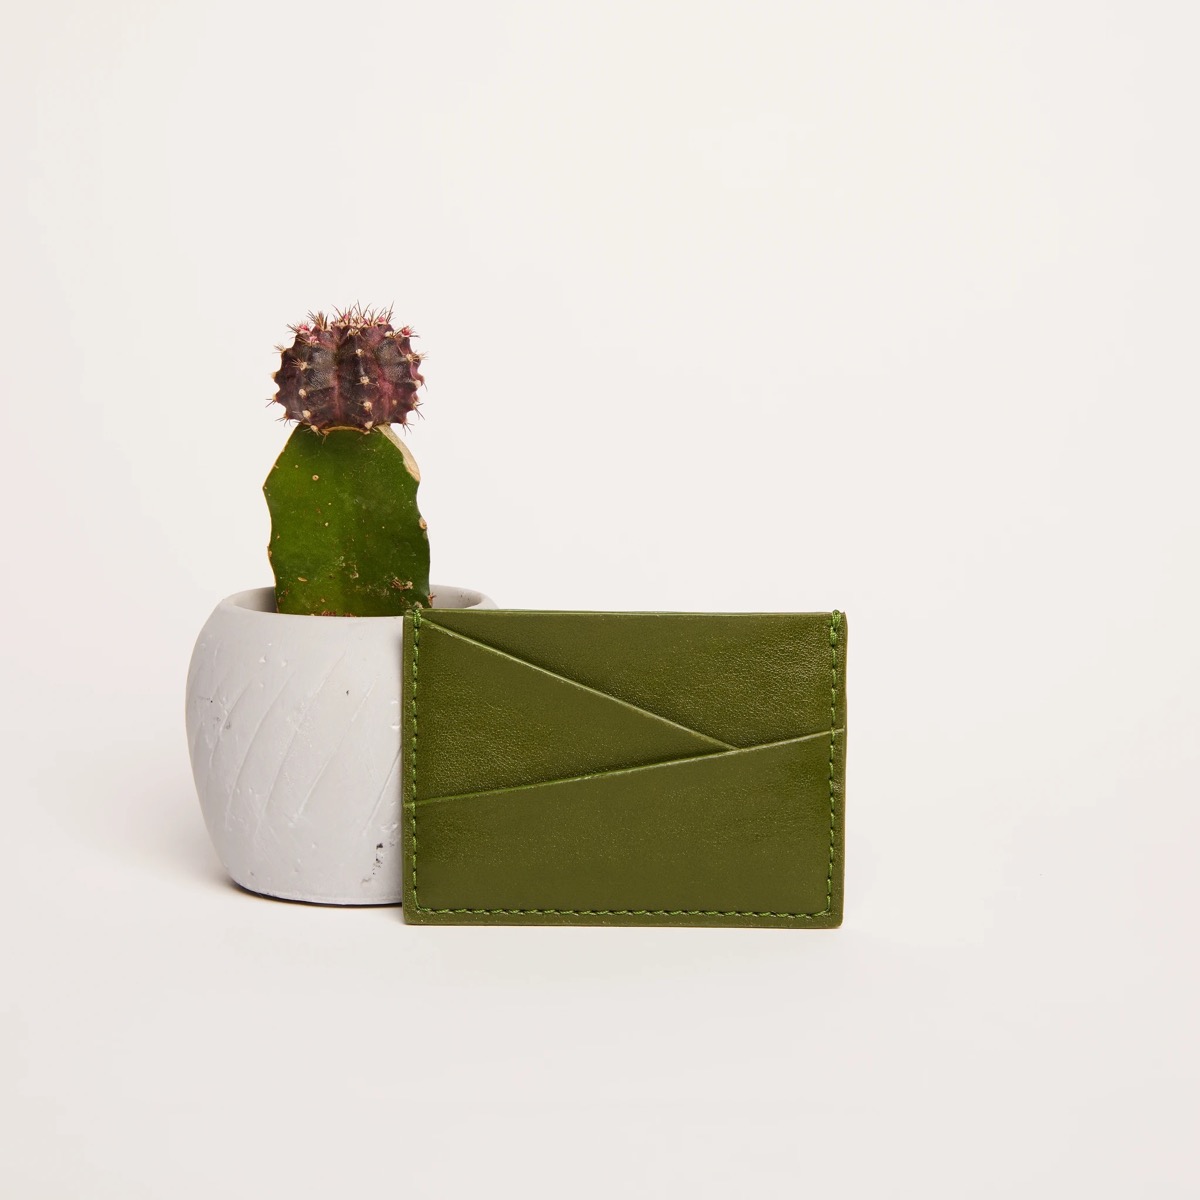 green business card holder next to cactus